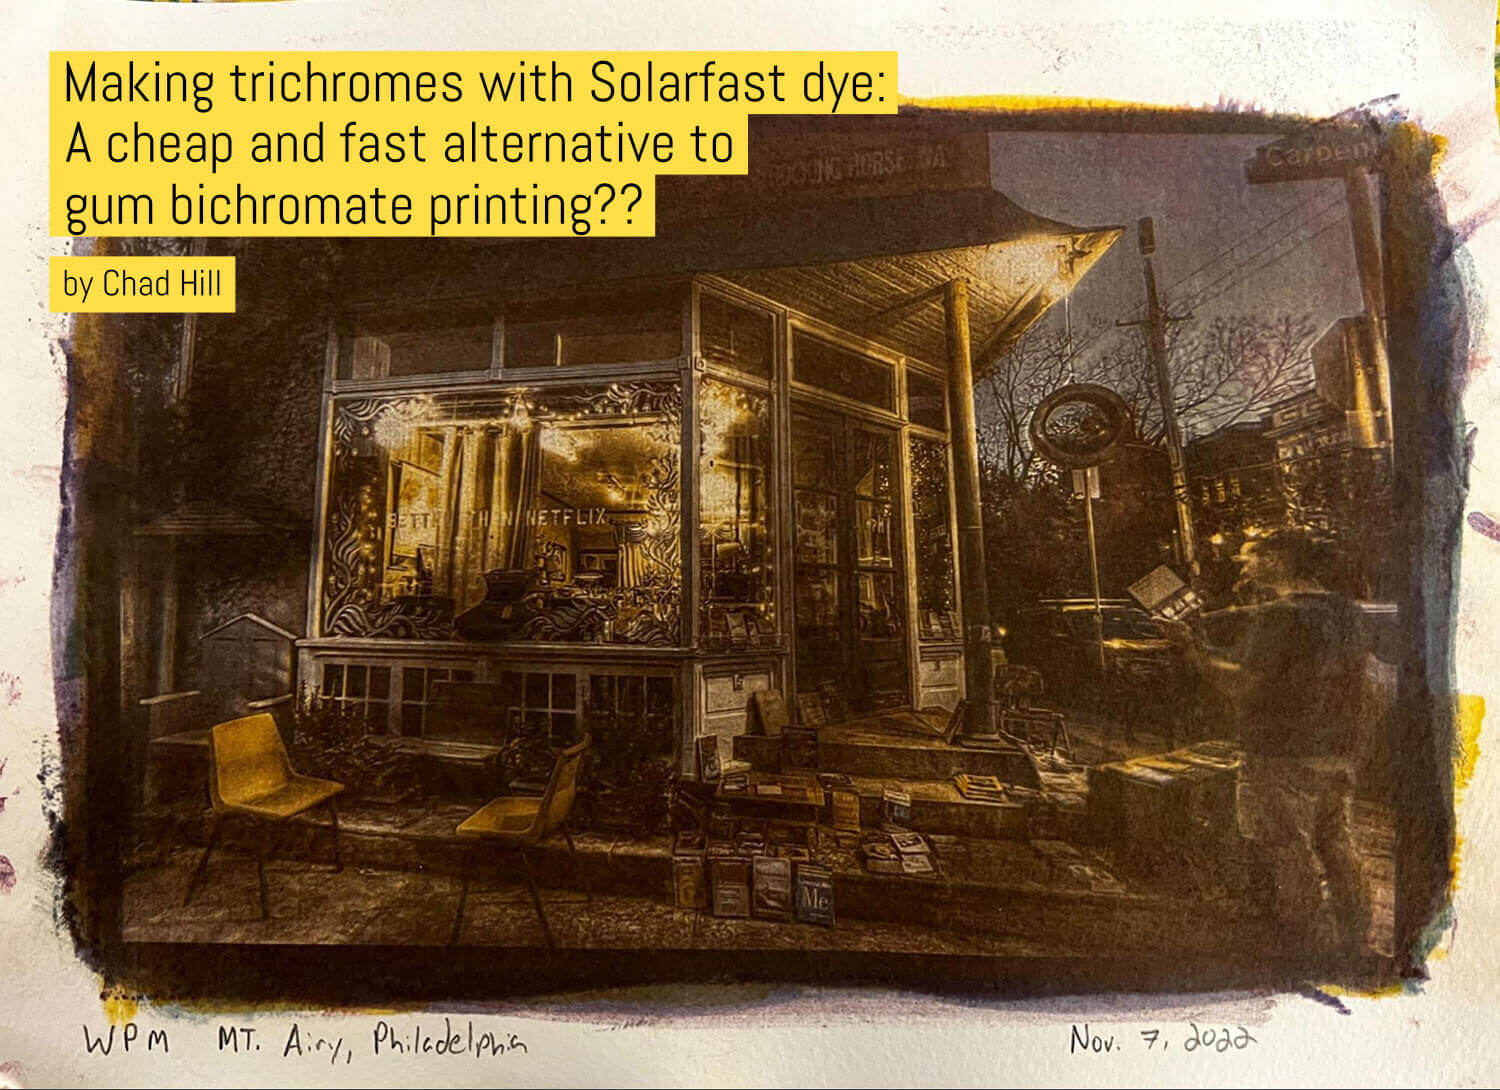 Making trichromes with Solarfast dye: A cheap and fast alternative to gum bichromate printing??